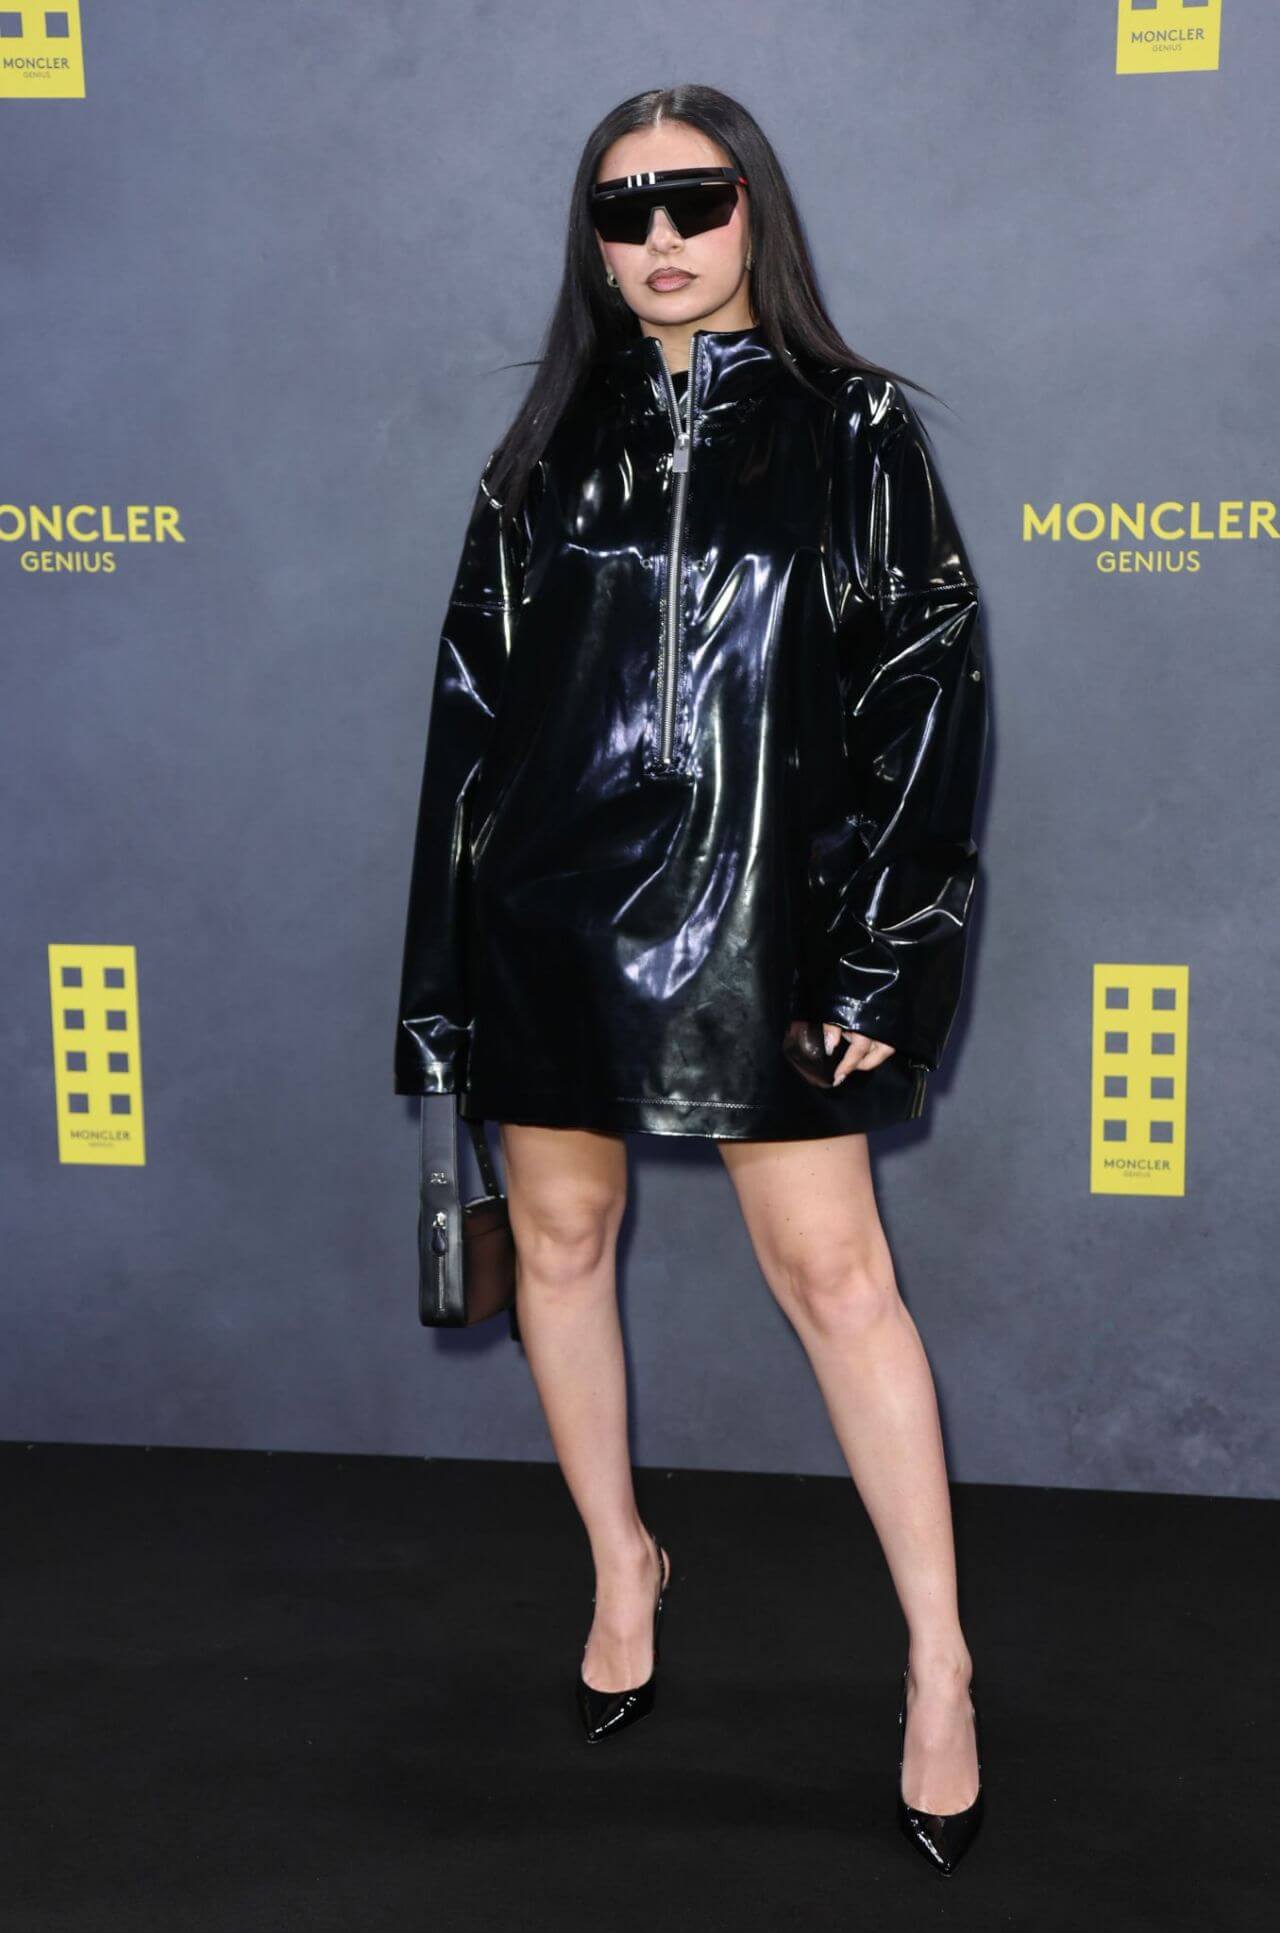 Charli XCX In Shiny Black Leather Outfit At Moncler Presents: The Art of Genius in London